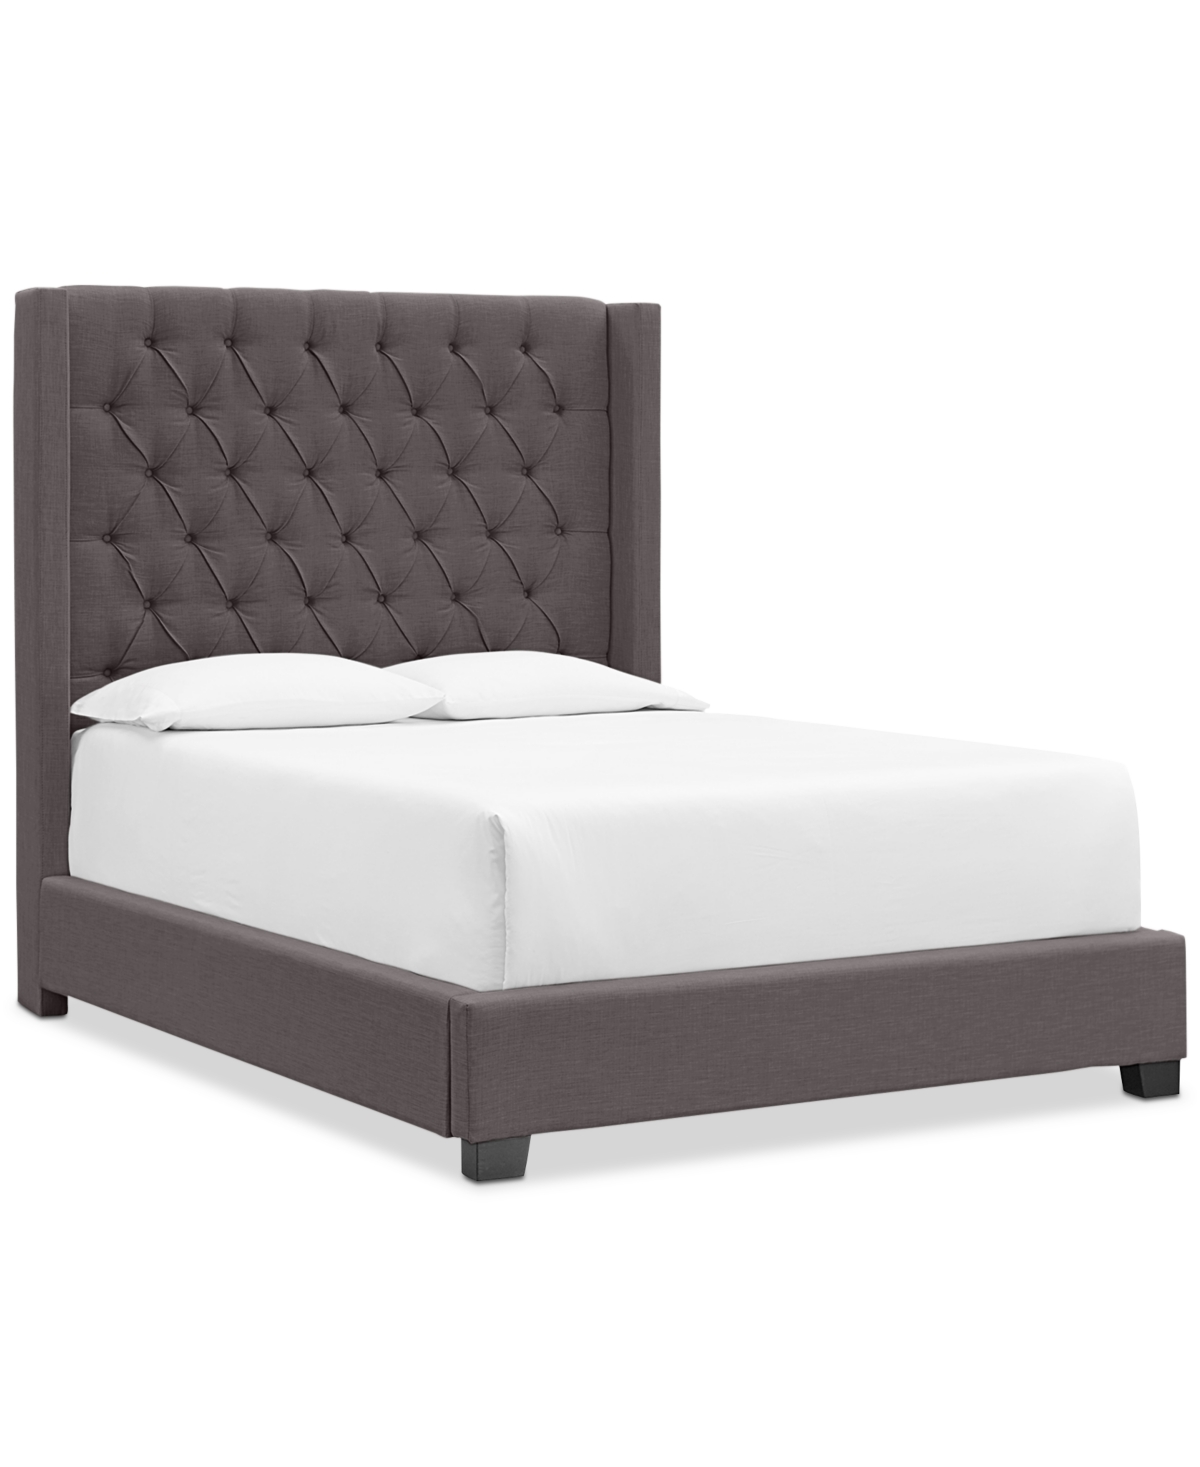 Furniture Monroe Ii Upholstered King Bed, Created For Macy's In Charcoal